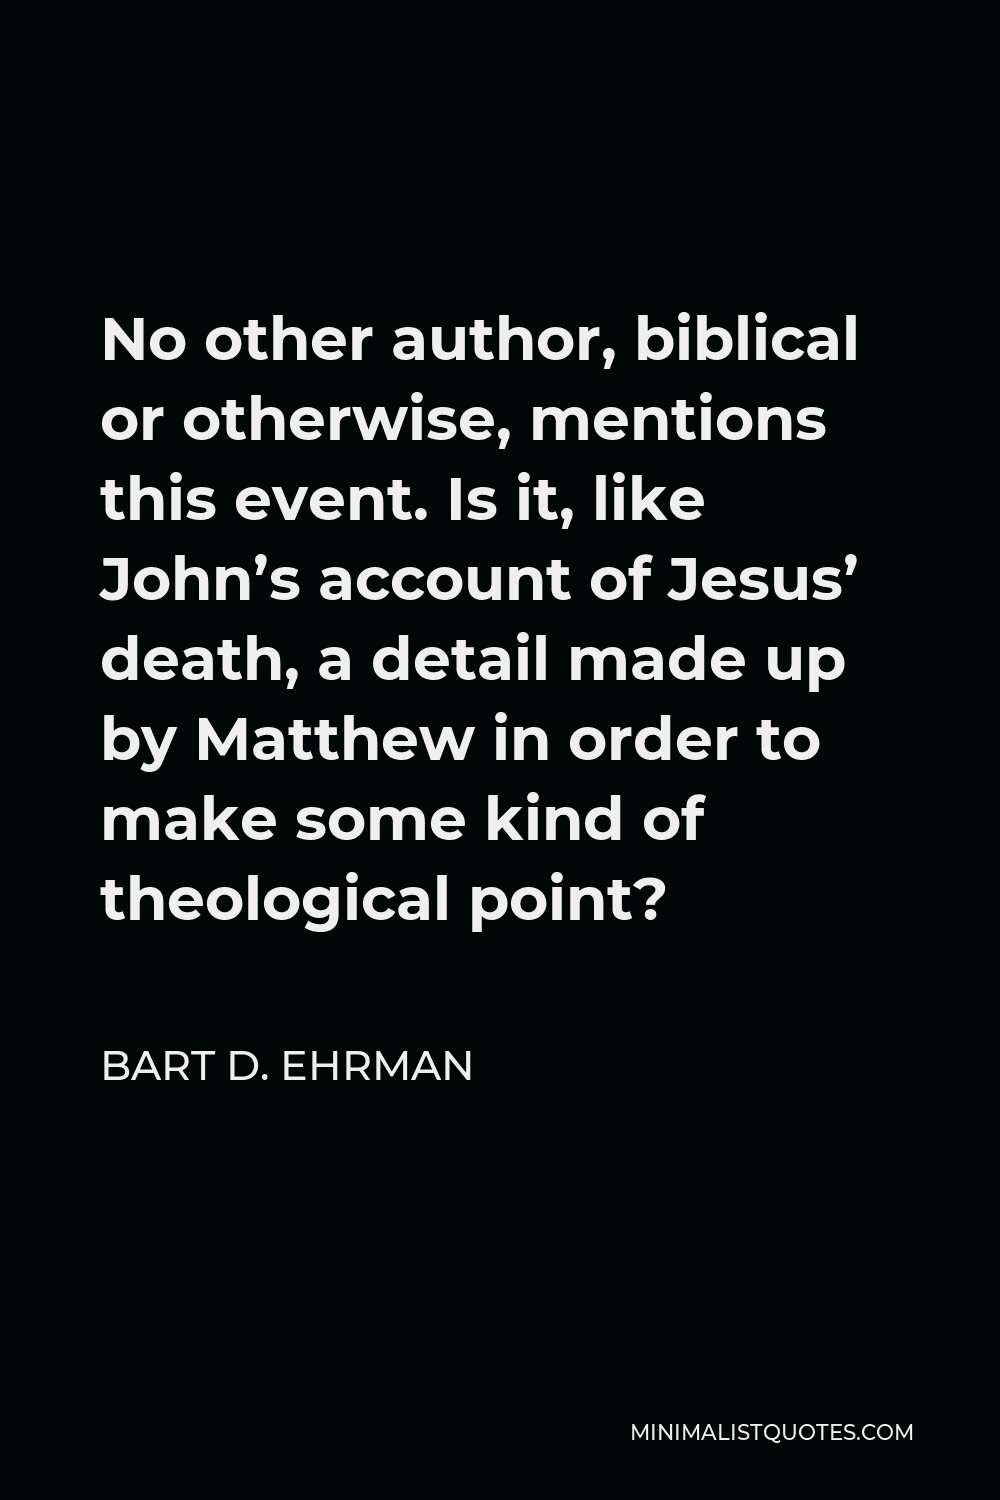 Bart D. Ehrman Quote - No other author, biblical or otherwise, mentions this event. Is it, like John’s account of Jesus’ death, a detail made up by Matthew in order to make some kind of theological point?